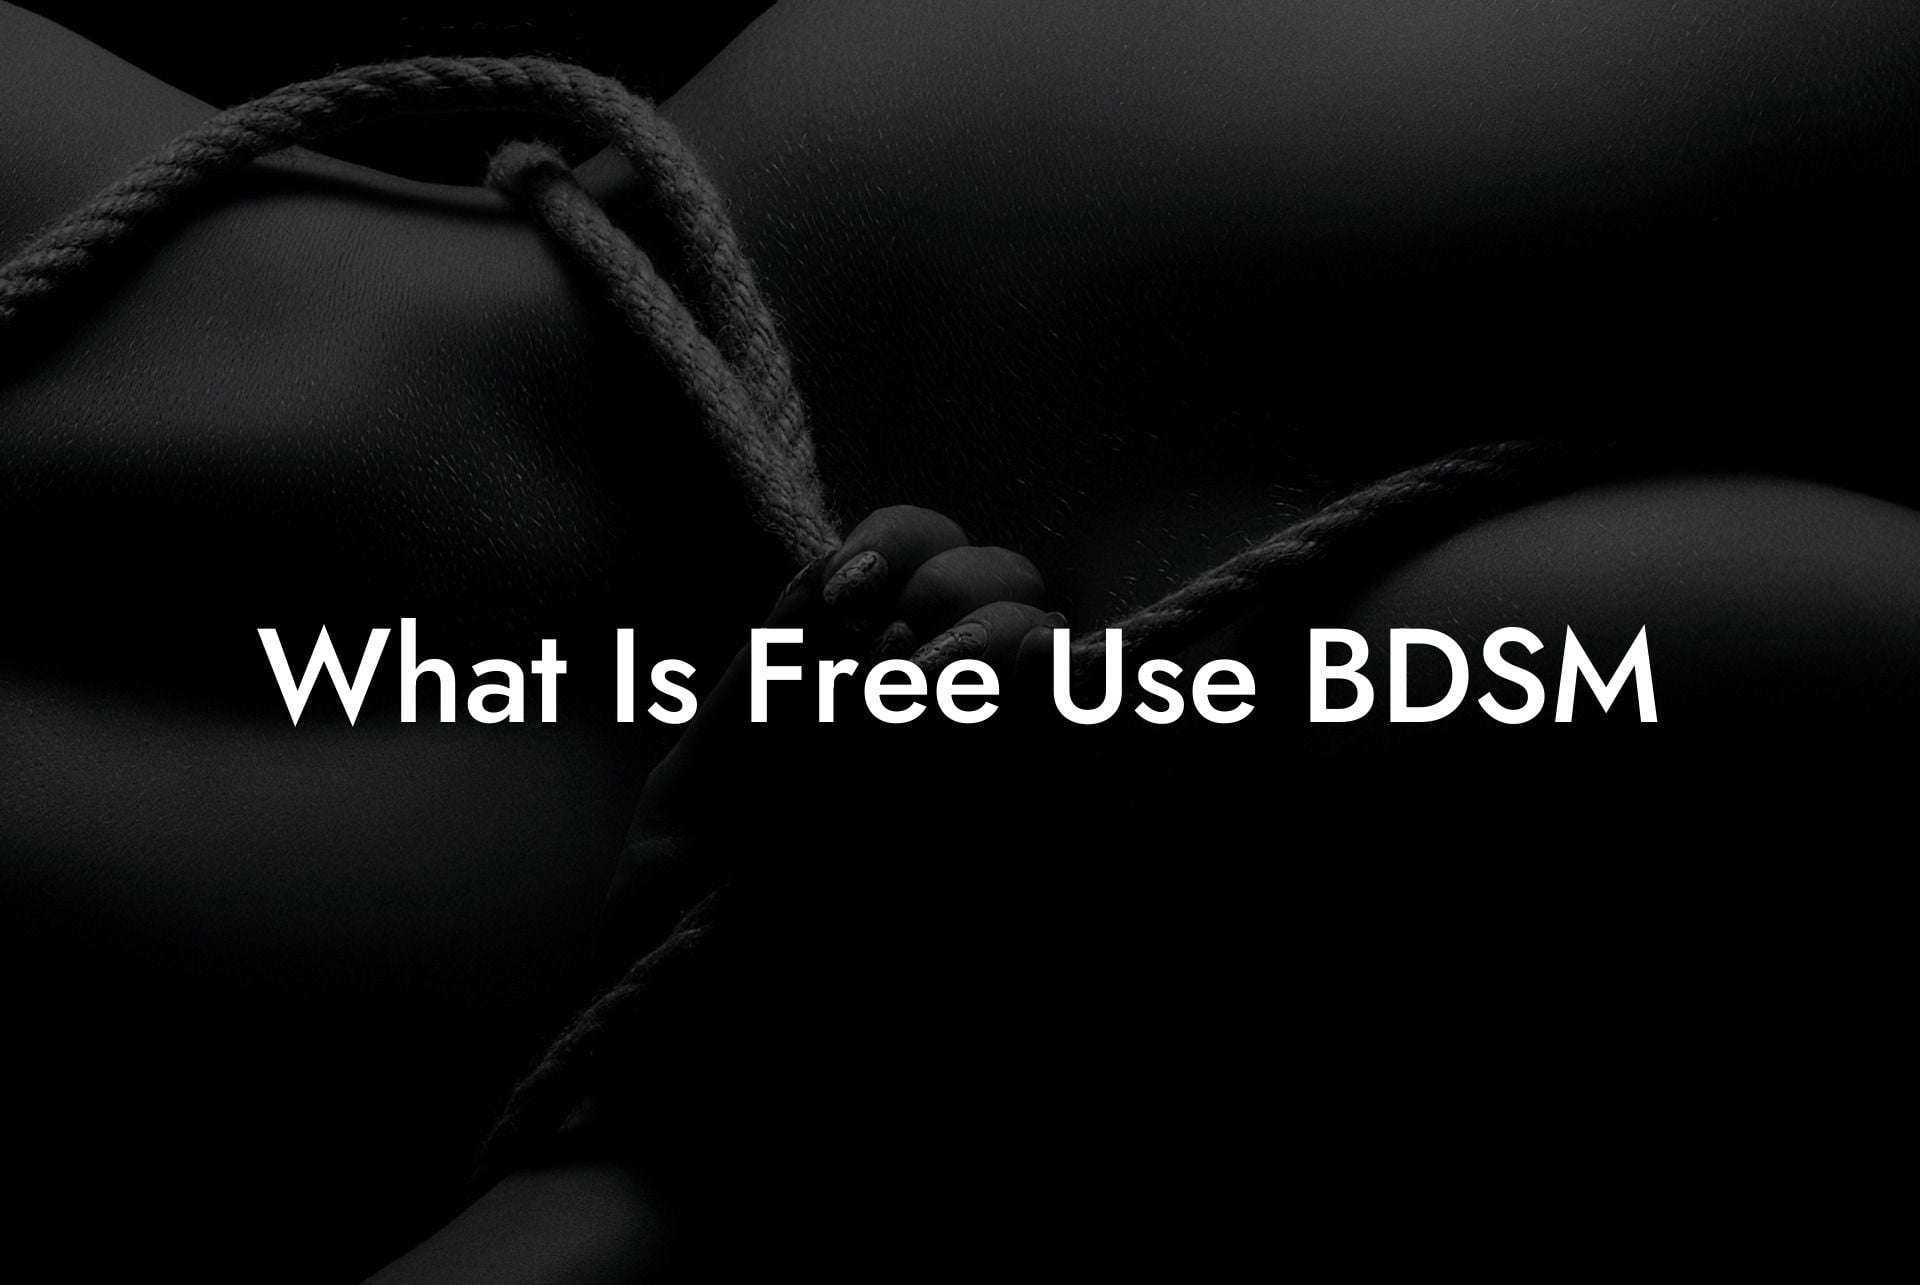 What Is Free Use BDSM